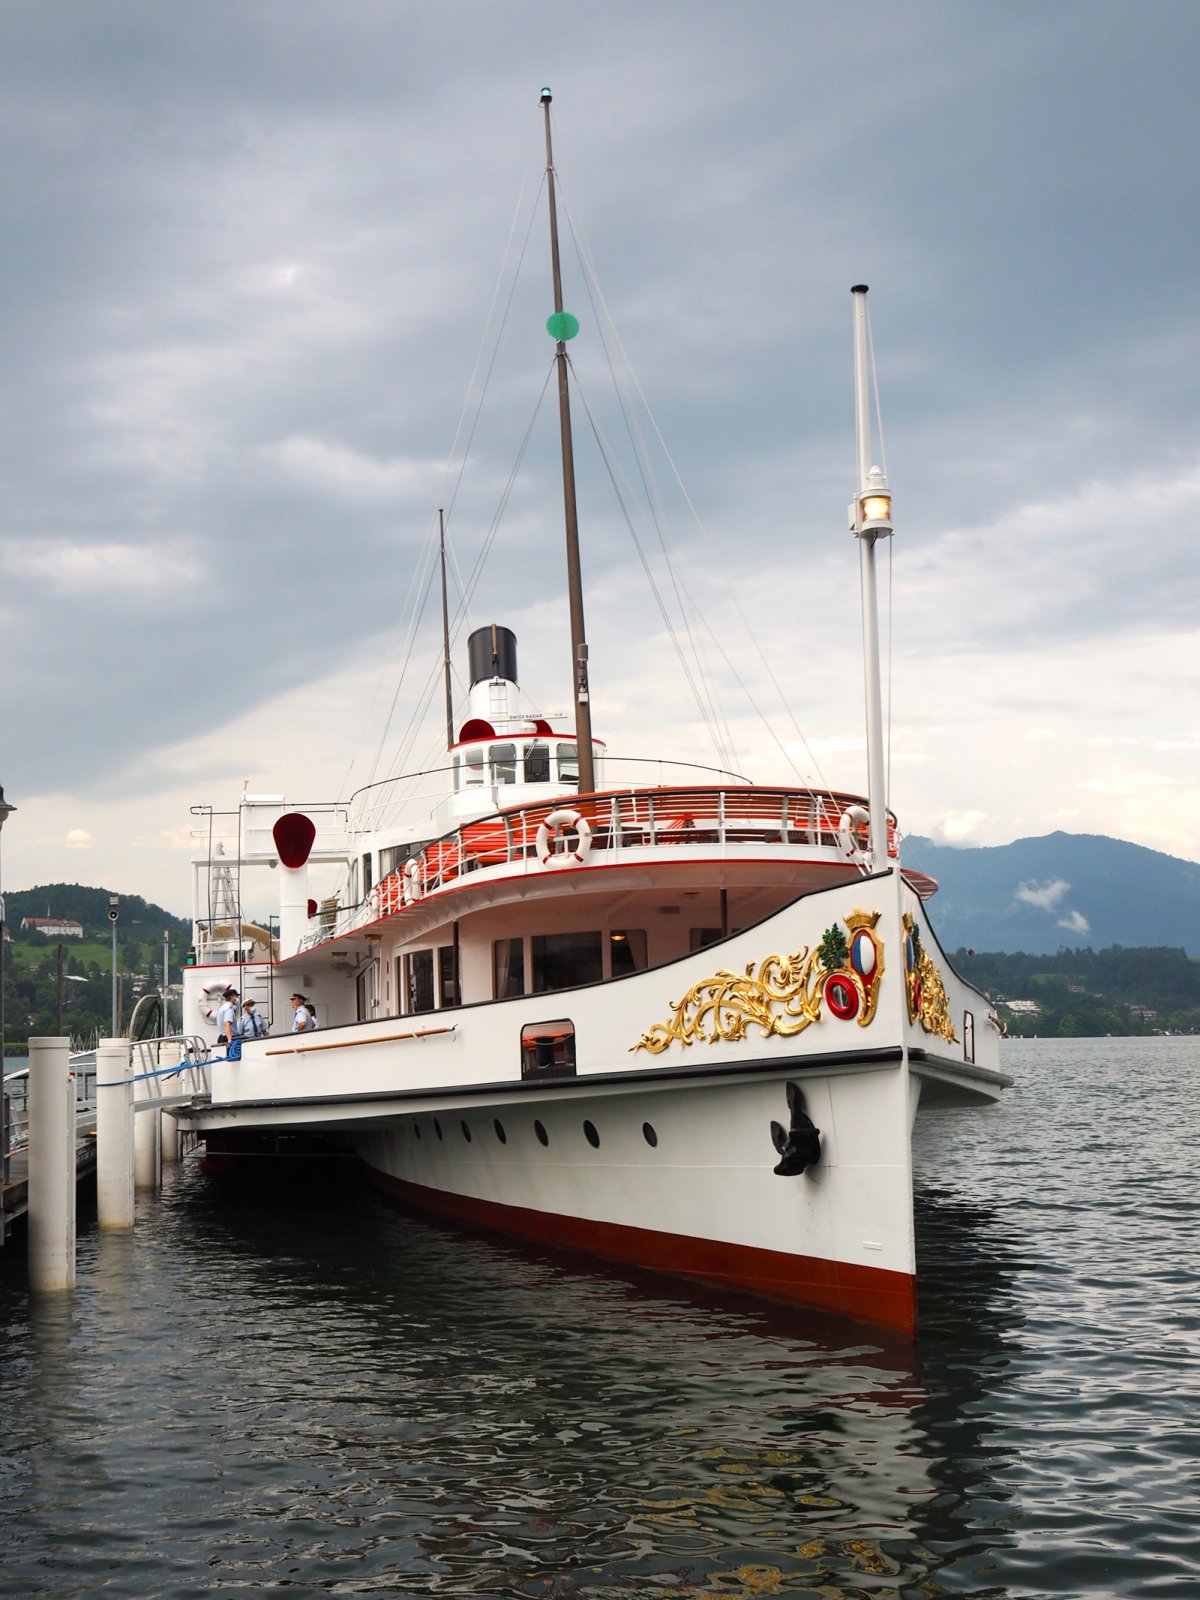 Stadt Luzern - Wine and Dine Cruise on Lake Lucerne